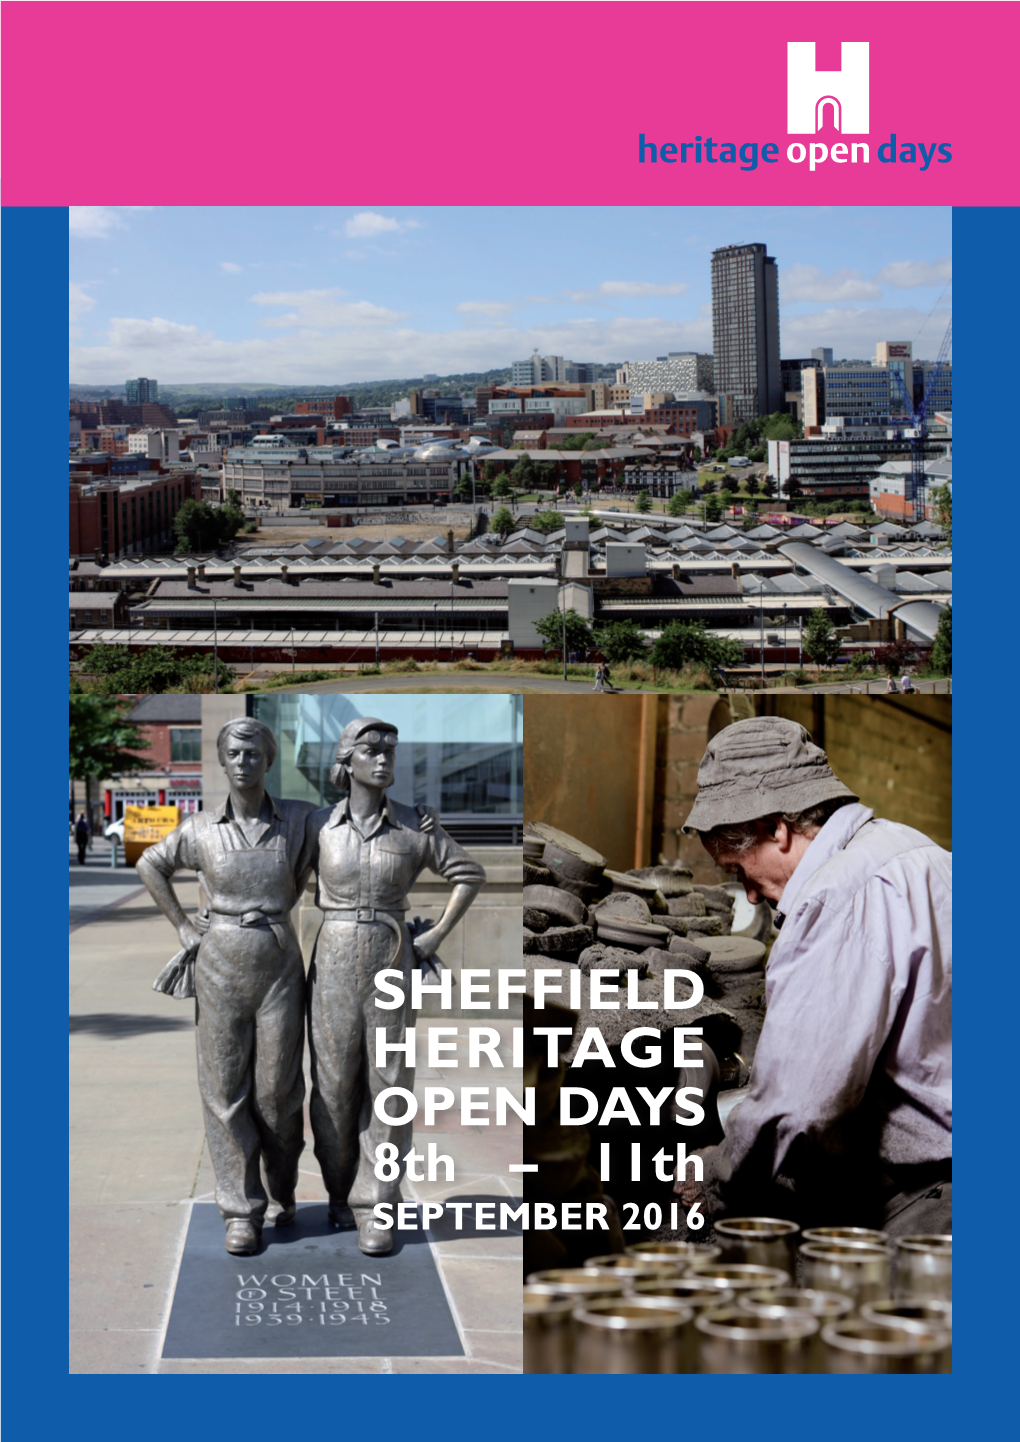 SHEFFIELD HERITAGE OPEN DAYS 8Th – 11Th SEPTEMBER 2016 Welcome to Sheffield Heritage Open Days Sept 8–11 2016